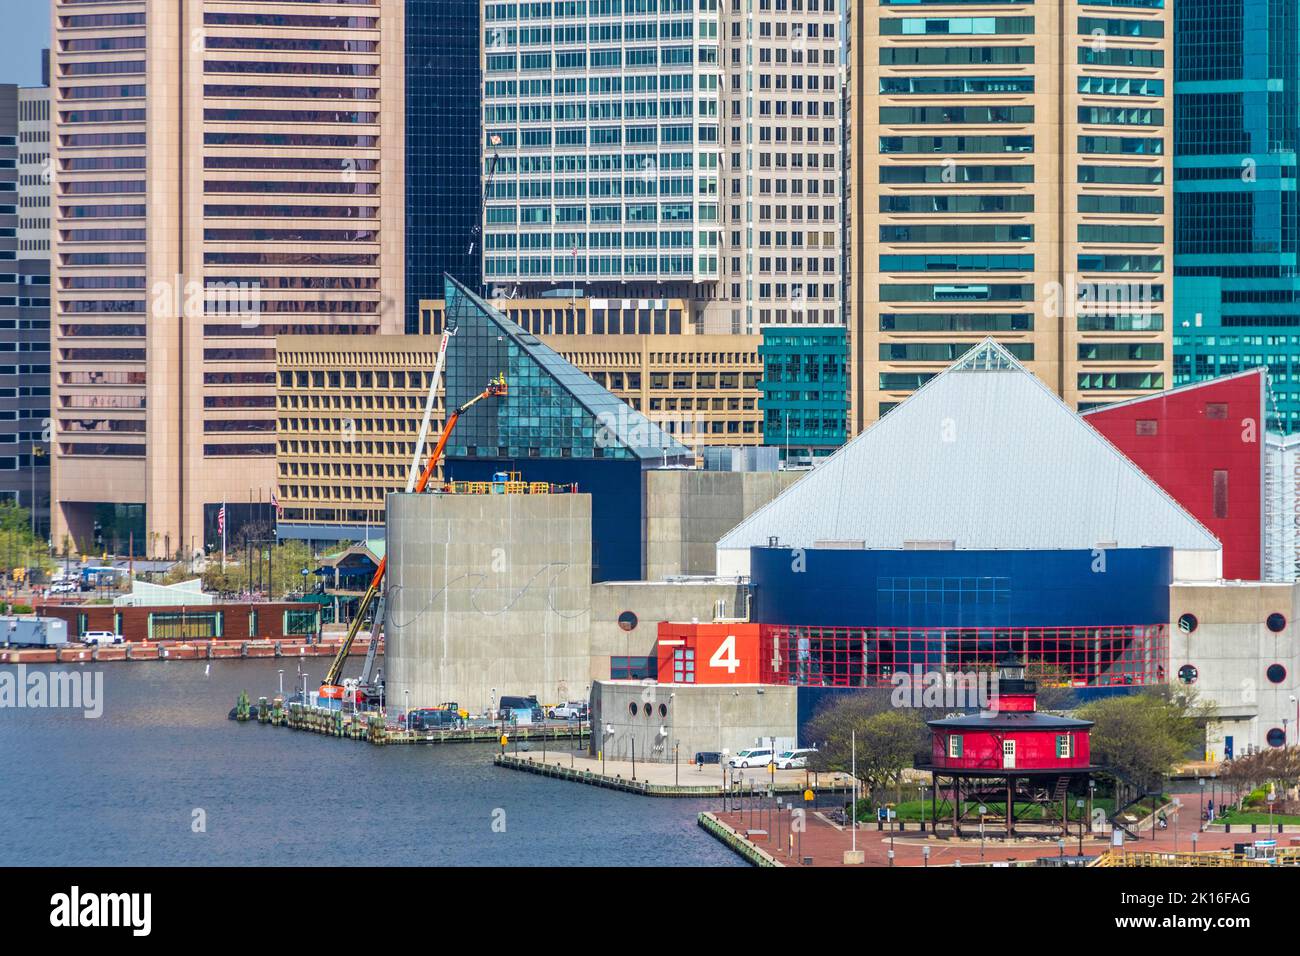 Baltimore Inner Harbor, Baltimore Maryland, with National Aquarium, Seven Foot Knoll Lighthouse, and mixed historic and modern skyscrapers. Stock Photo